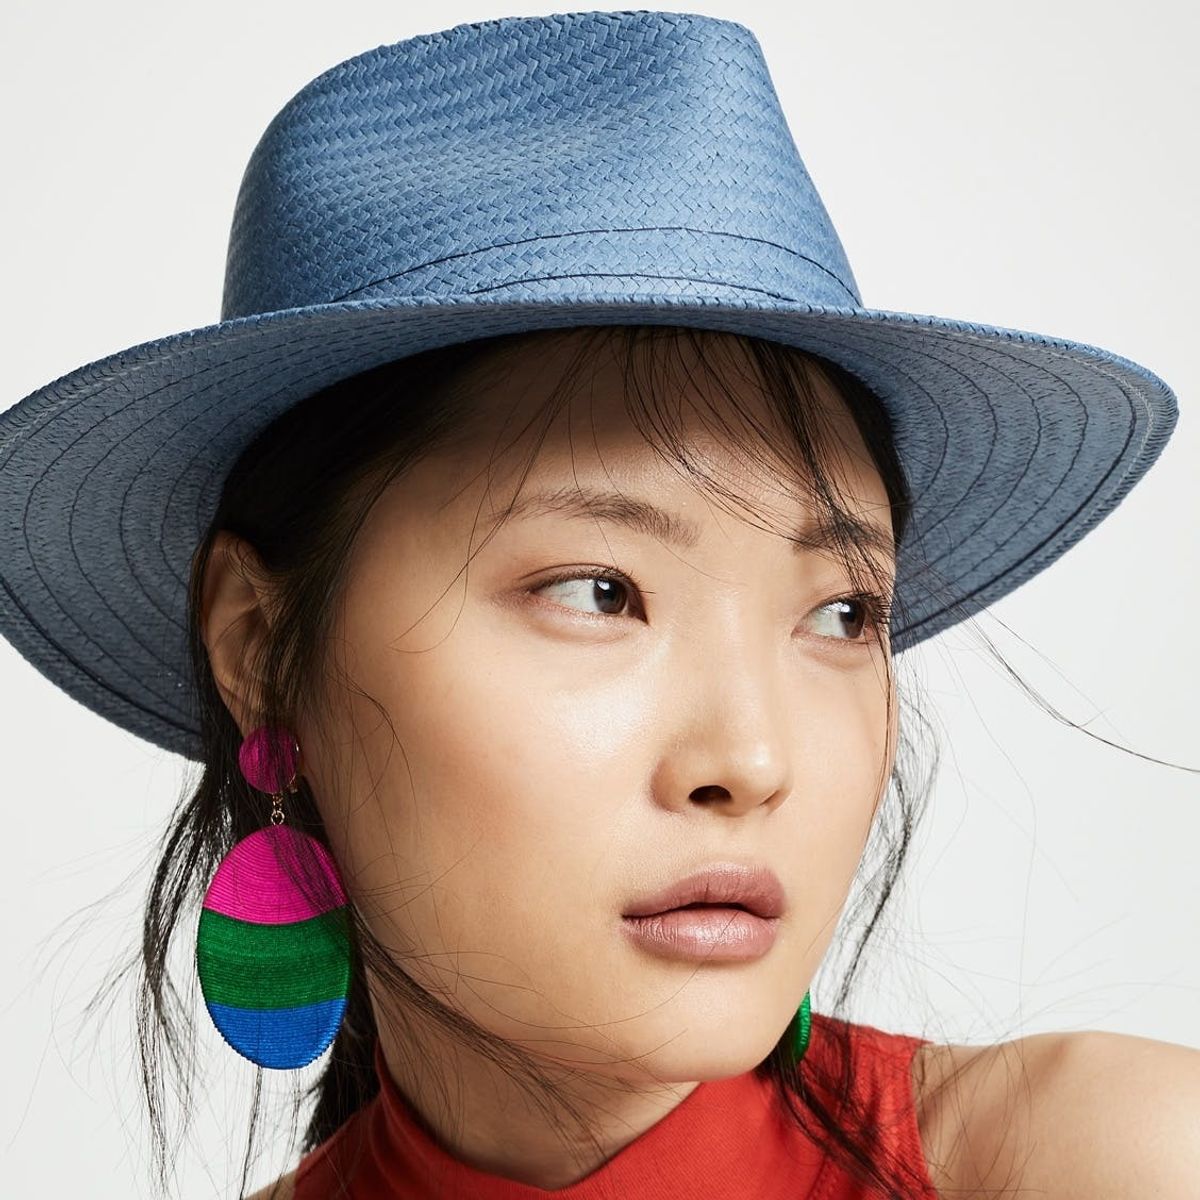 21 Spring Hats to Keep You Covered When You Finally Get to the Beach